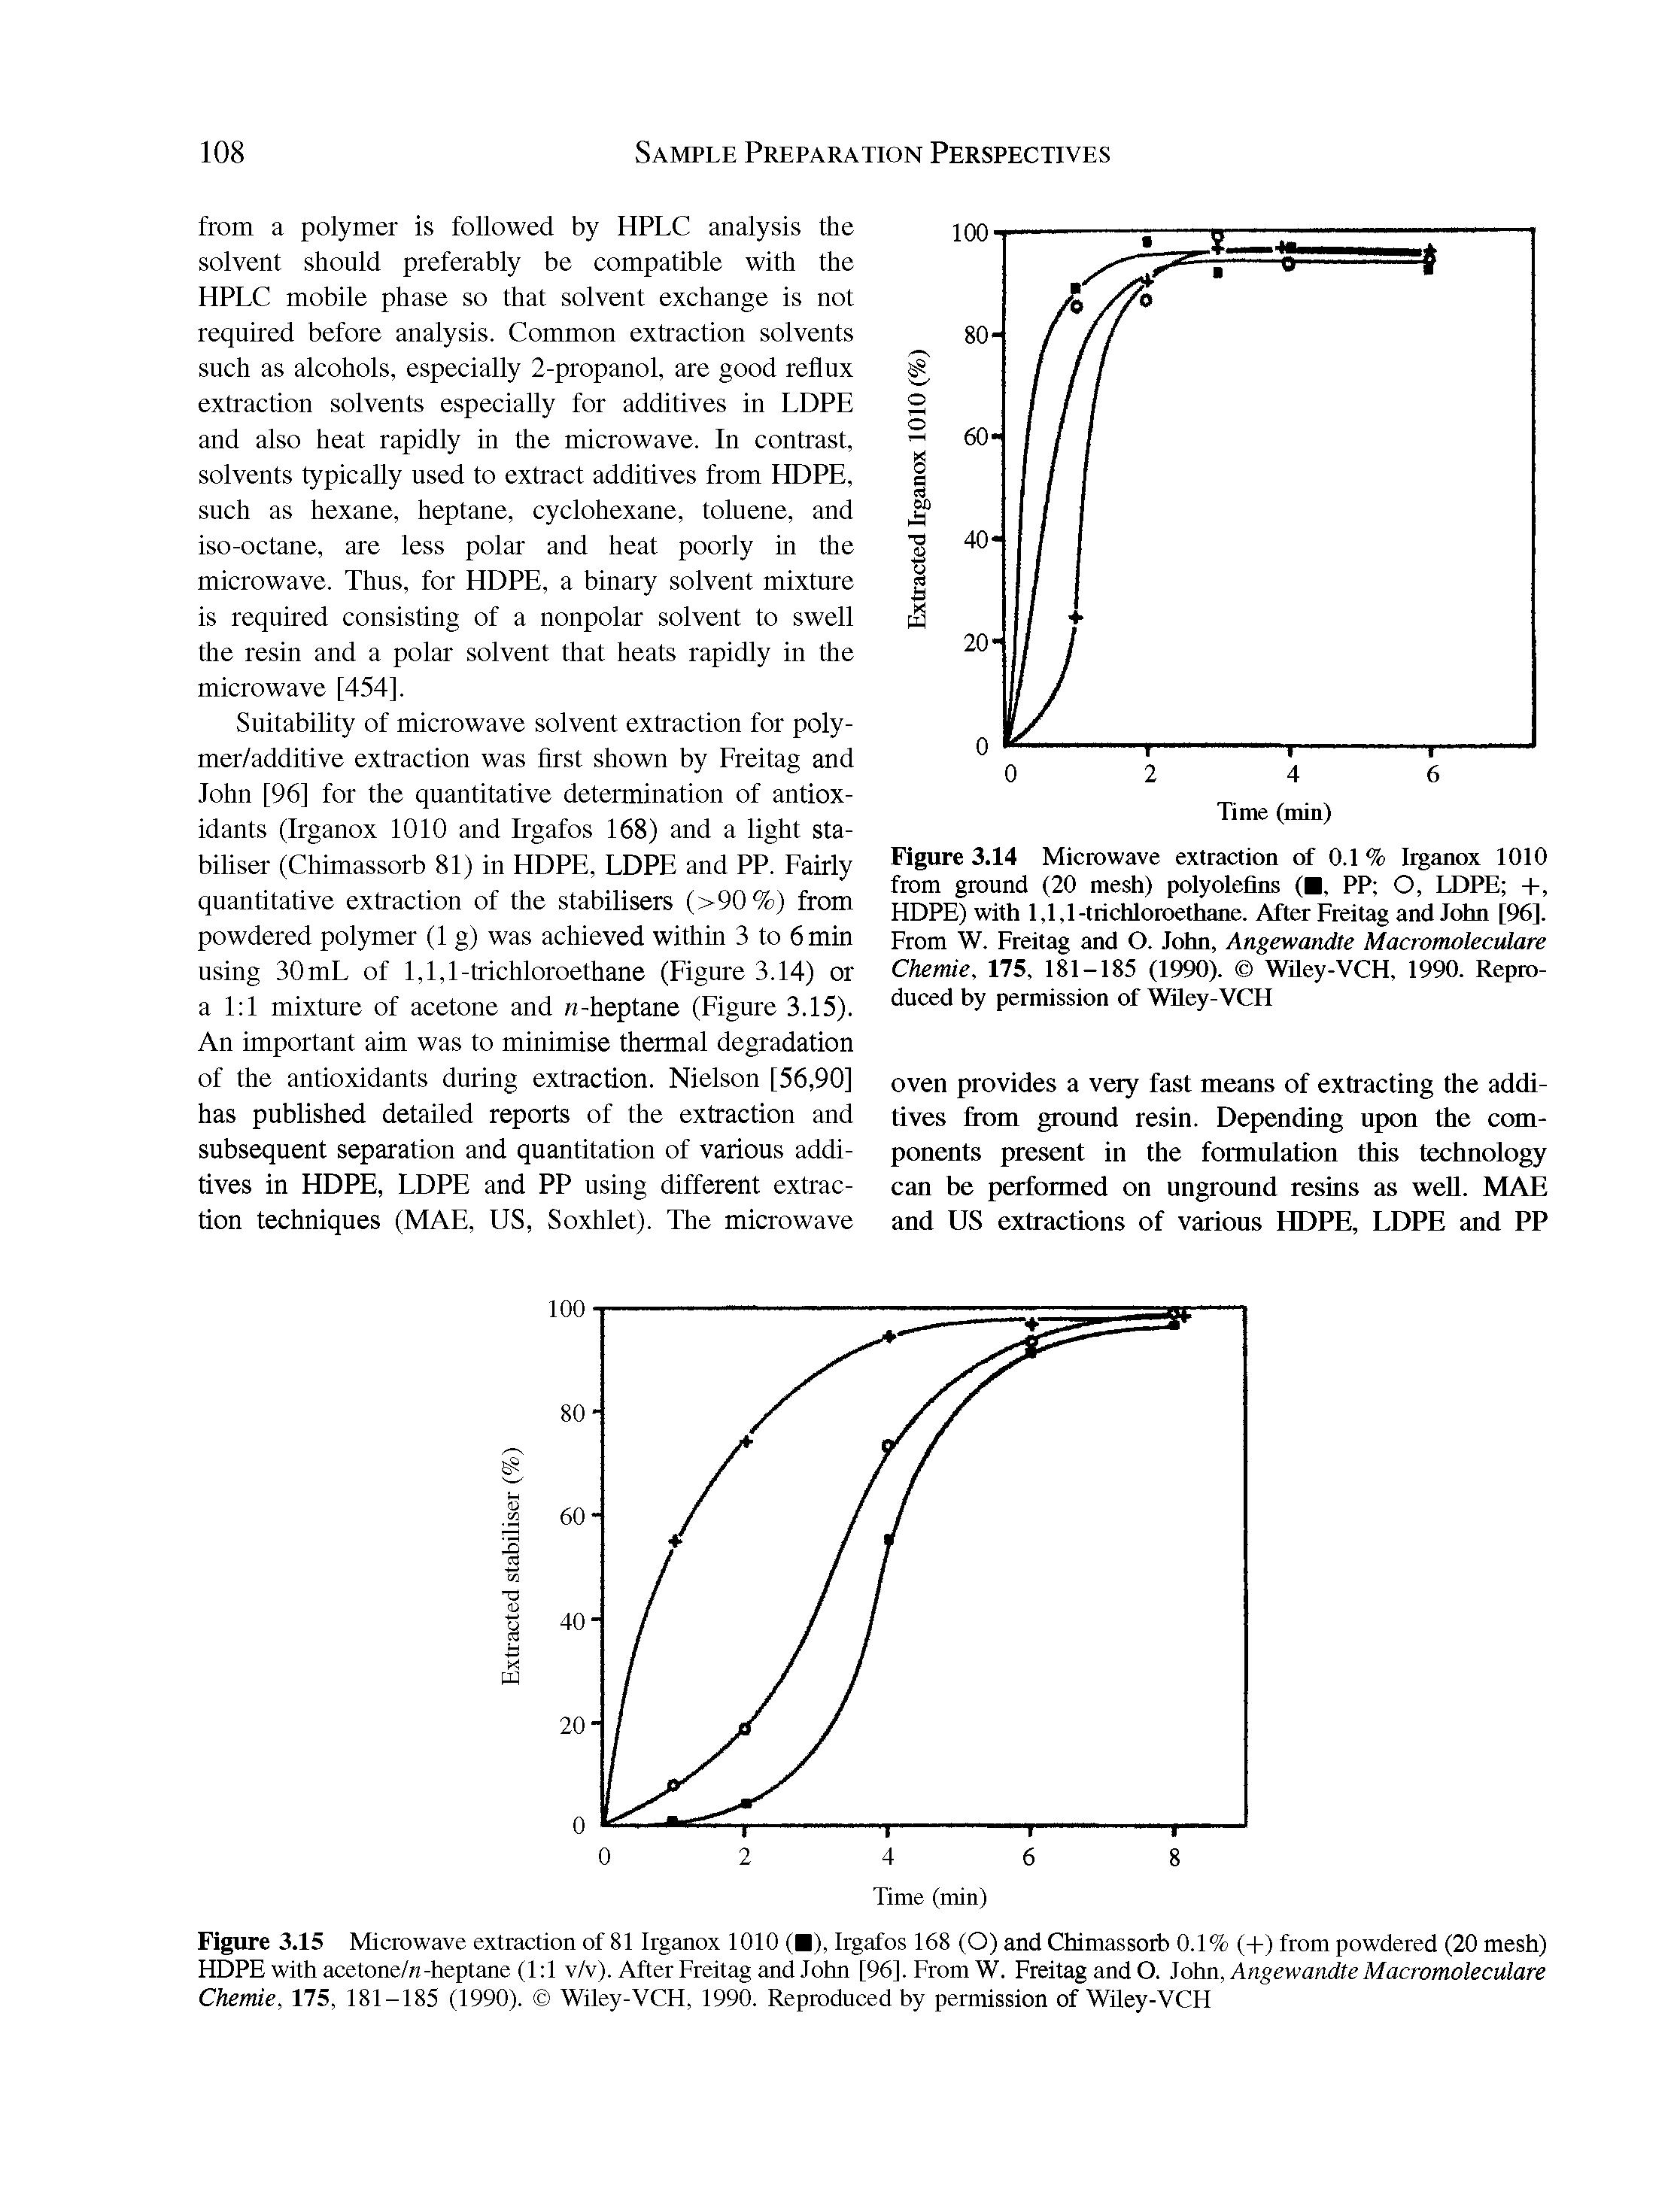 Figure 3.14 Microwave extraction of 0.1 % Irganox 1010 from ground (20 mesh) polyolefins ( , PP O, LDPE +, HDPE) with 1,1,1-trichloroethane. After Freitag and John [96]. From W. Freitag and O. John, Angewandte Macromoleculare Chemie, 175, 181-185 (1990). Wiley-VCH, 1990. Reproduced by permission of Wiley-VCH...